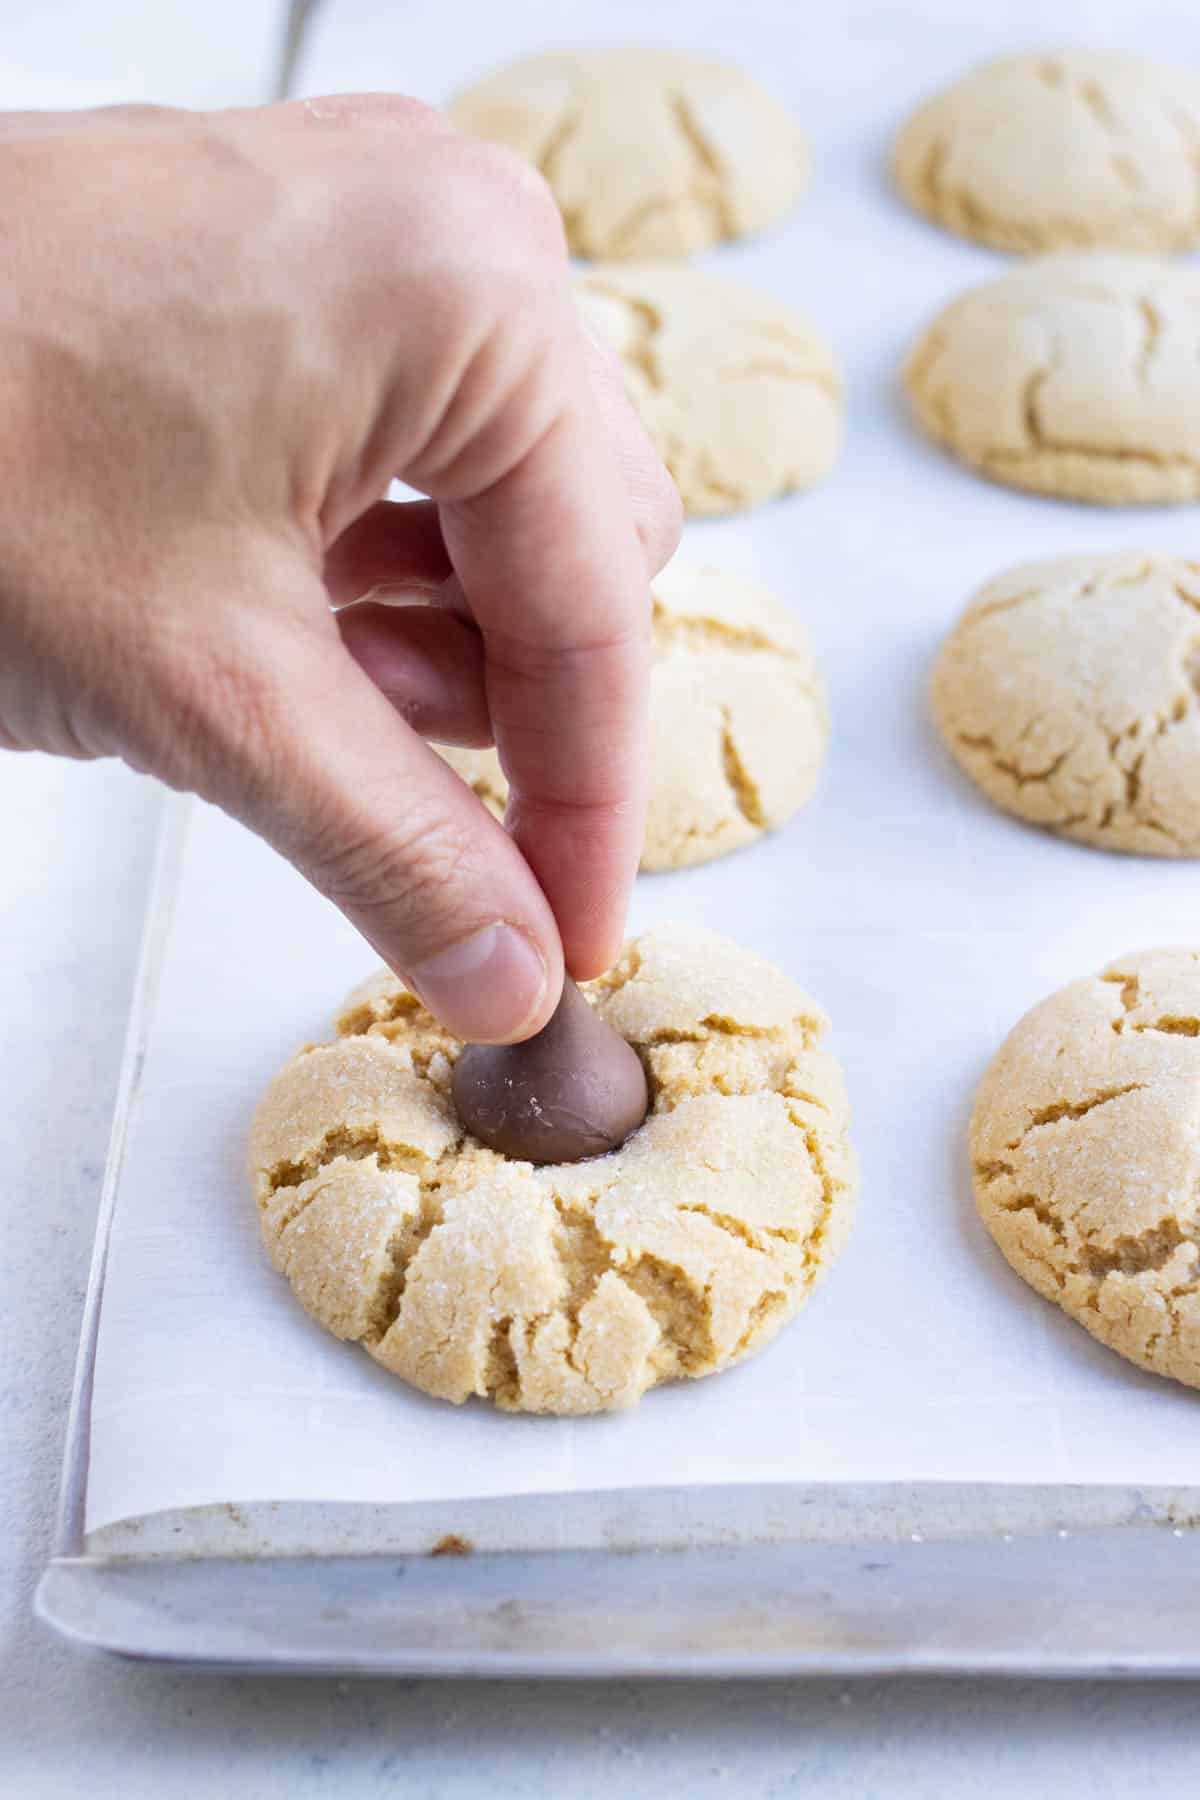 A hand presses in a Hershey's kiss into warm cookies.